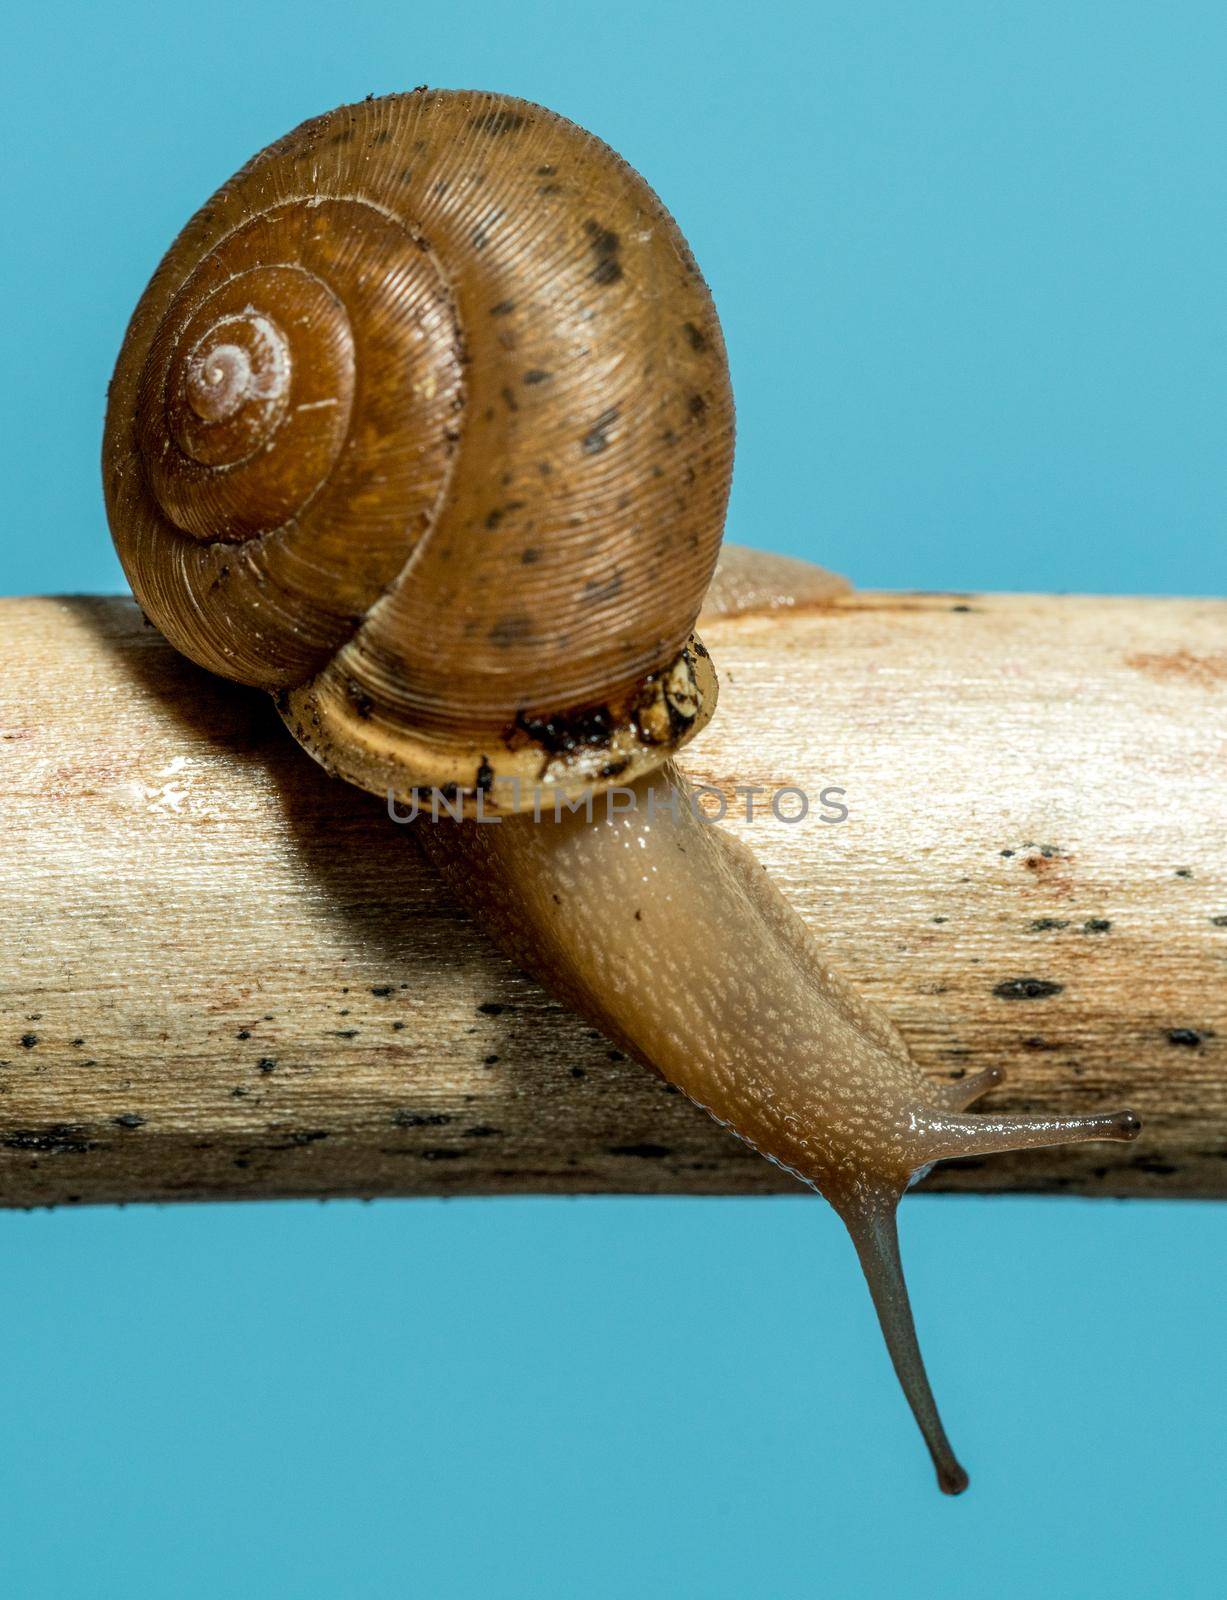 Studio image of a pet garden snail climbing up a twig by steheap